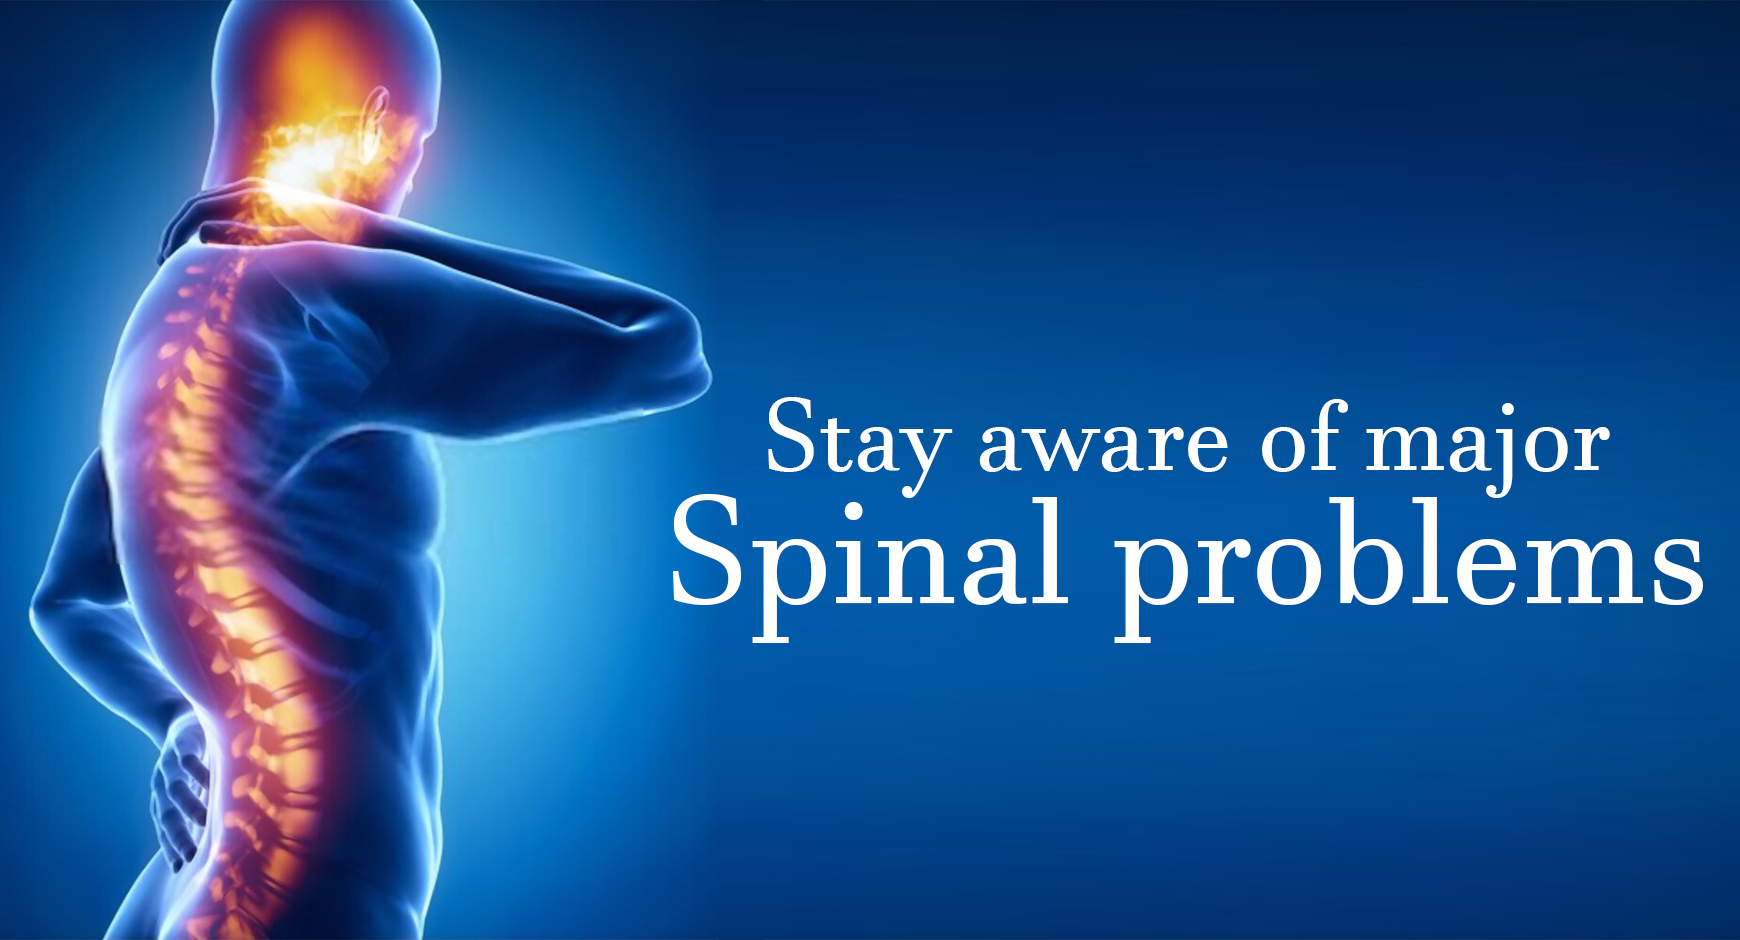 Stay aware of major spinal problems